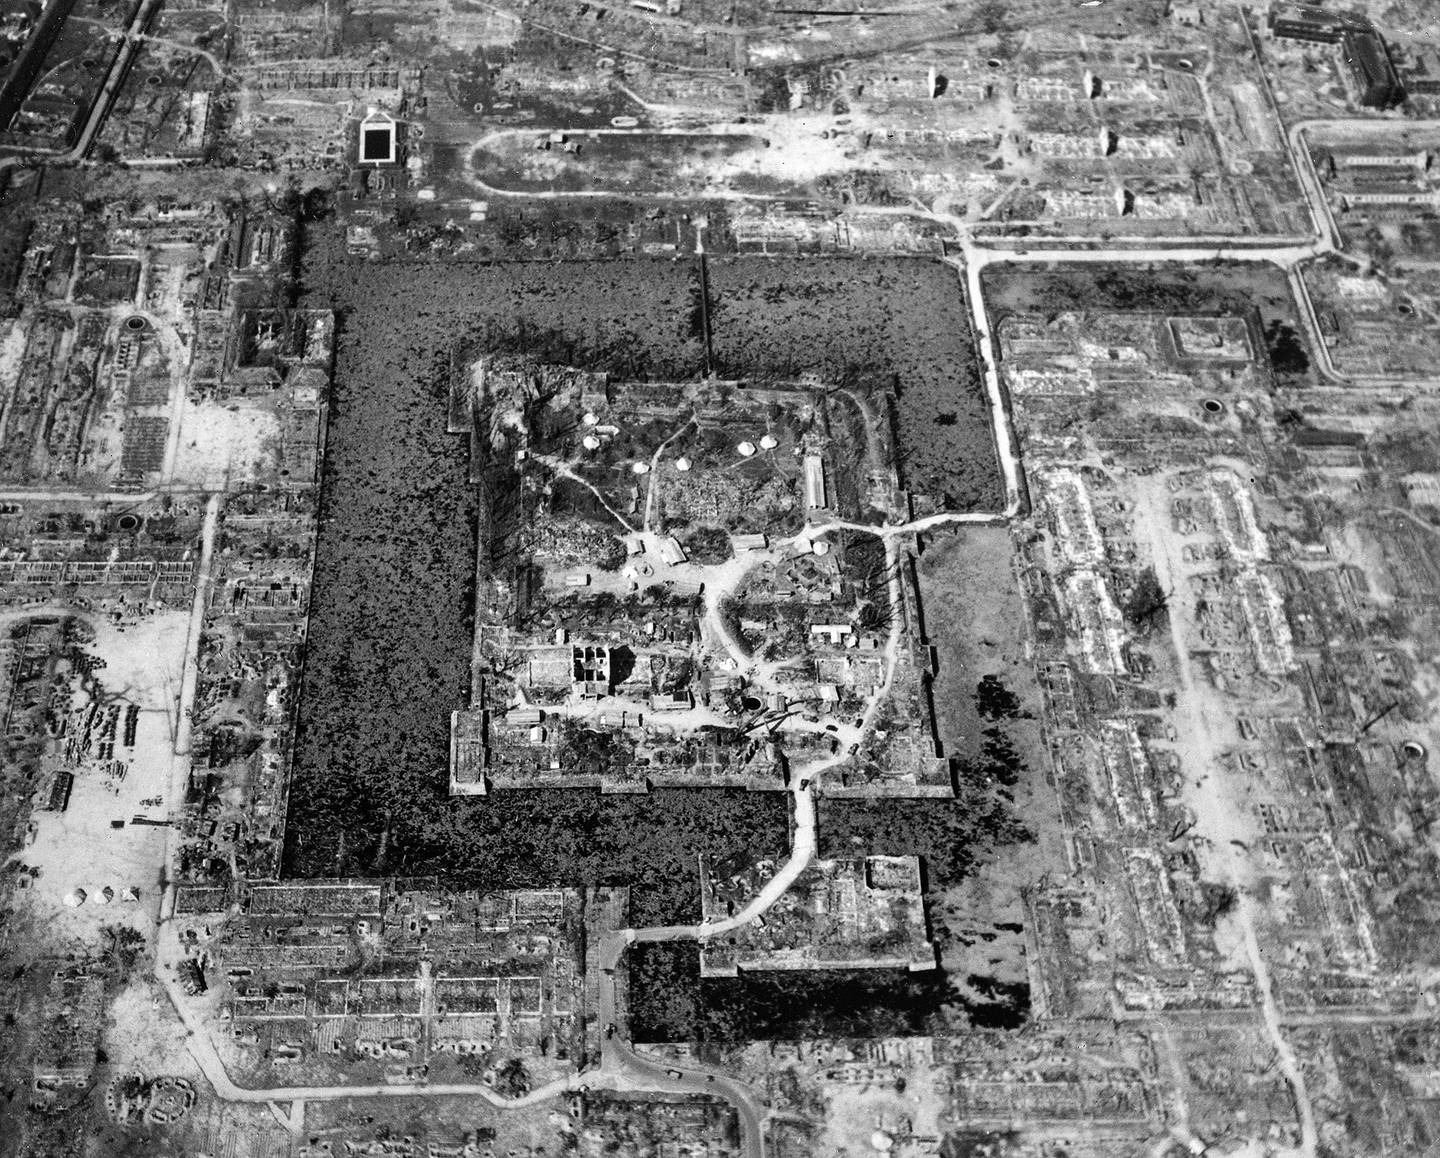 This Aug. 6, 1945, file photo released by the U.S. Air Force shows the total destruction of Hiroshima, Japan, as the result of the first atomic bomb dropped.